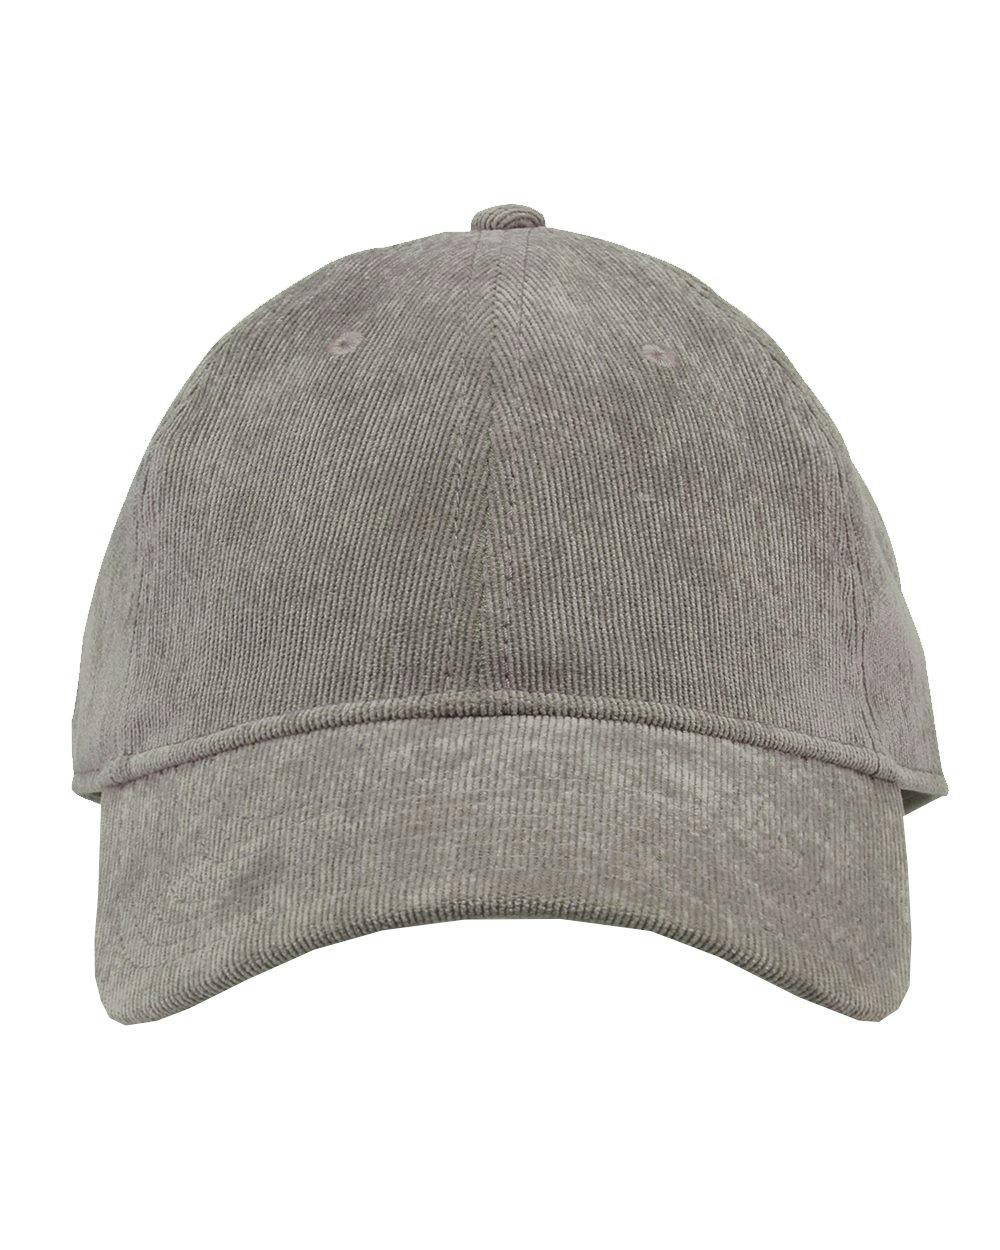 Image for Relaxed Corduroy Cap - GB568